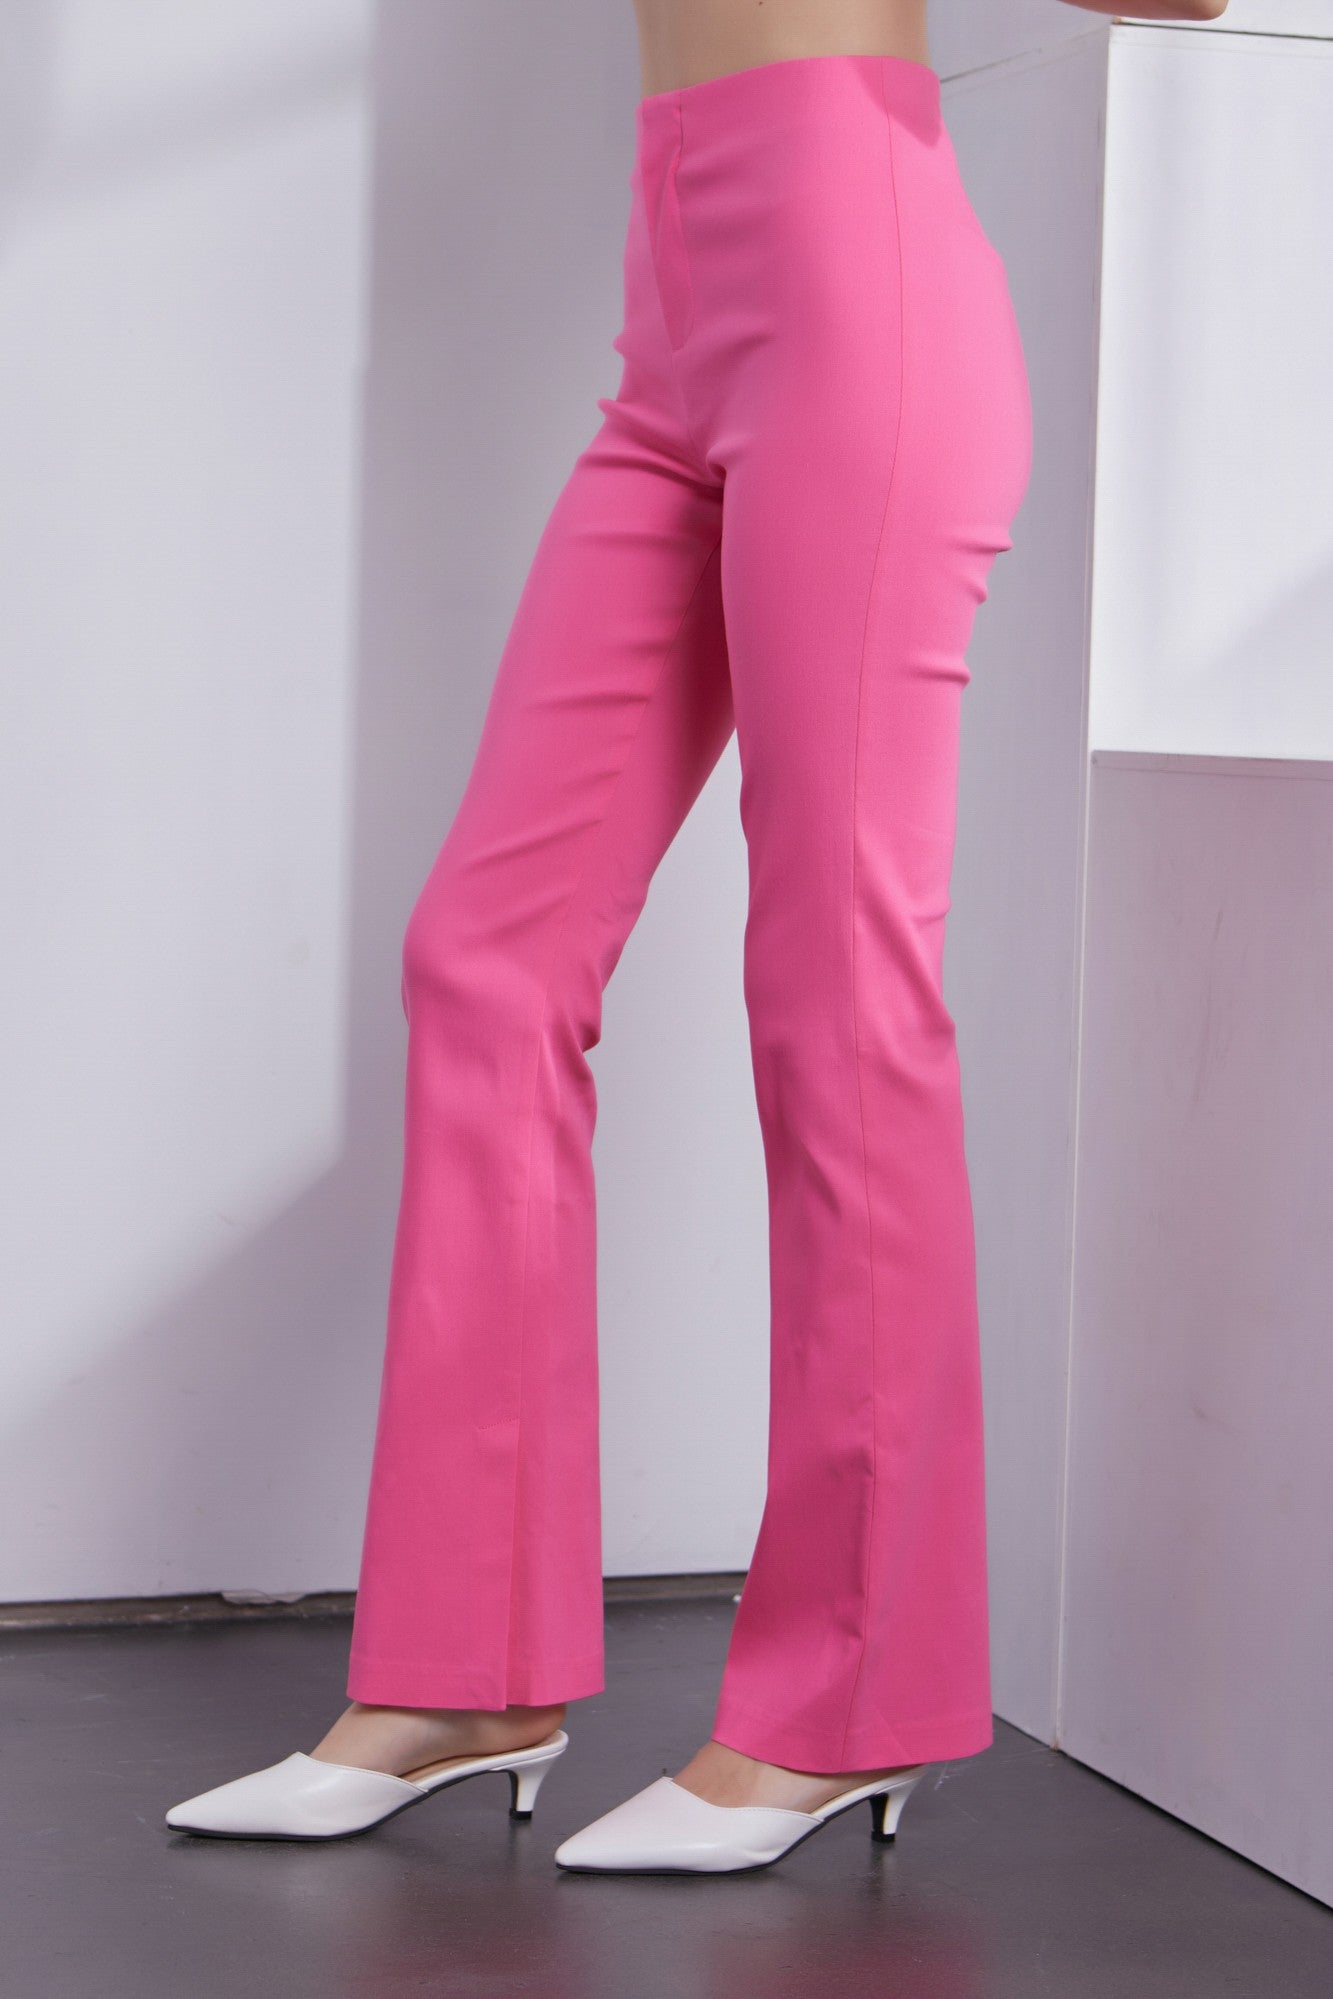 Pretty in Pink Pants